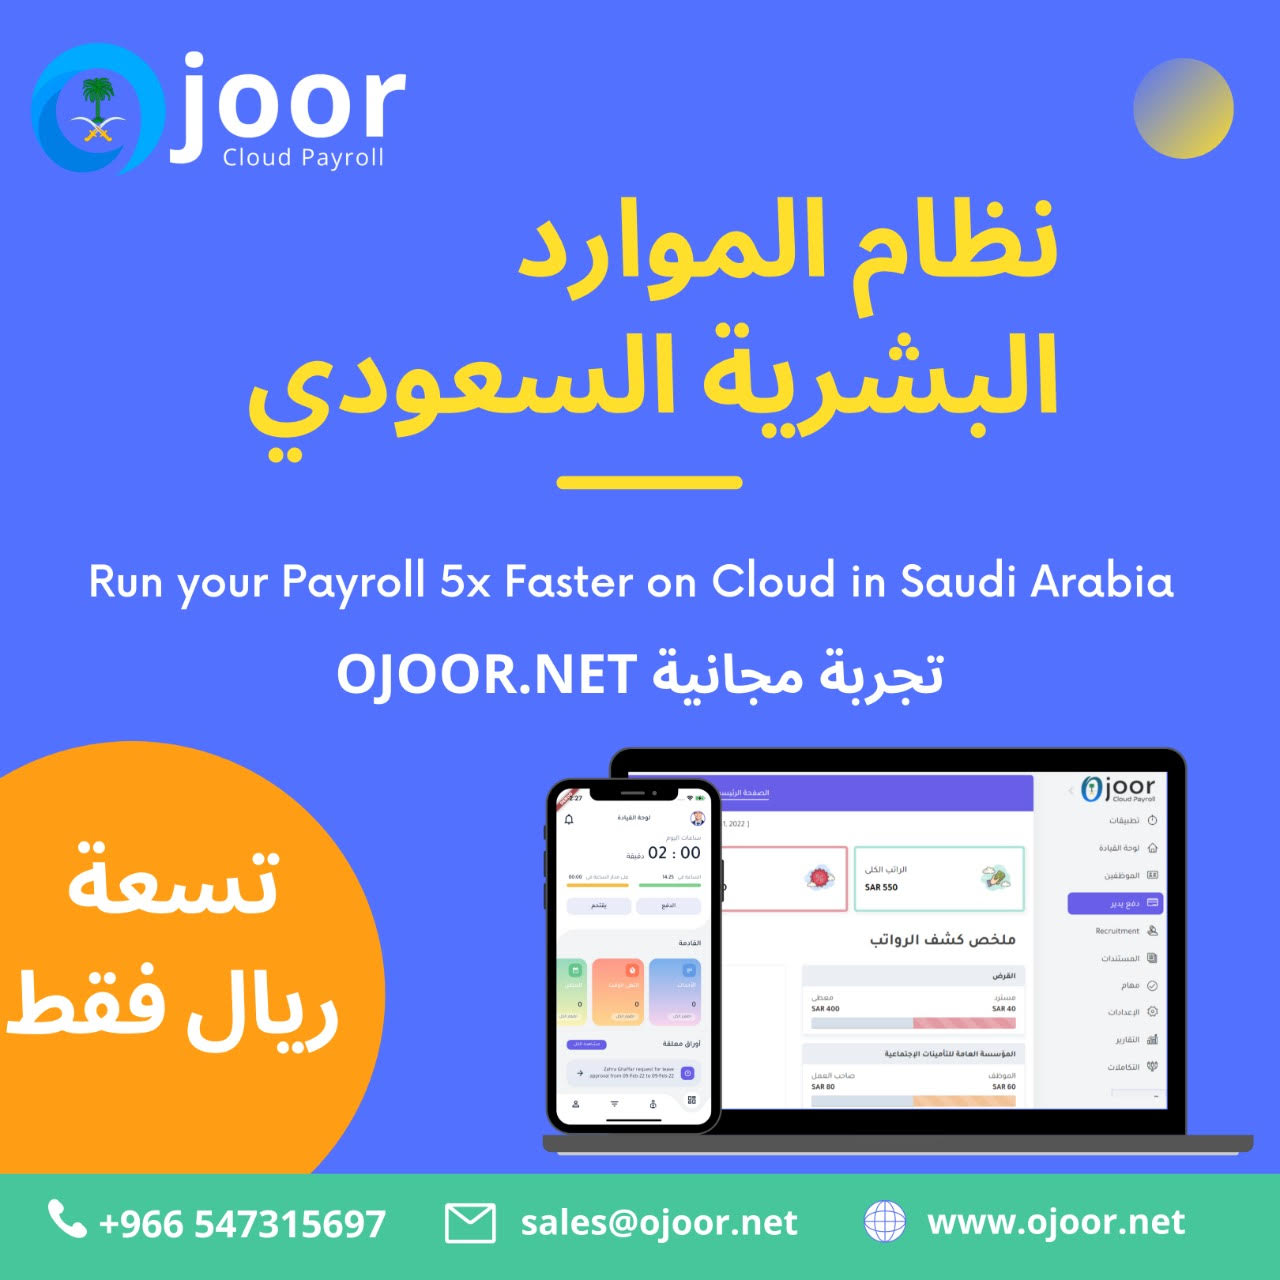 What is the Web-Based Payroll Software in Saudi?